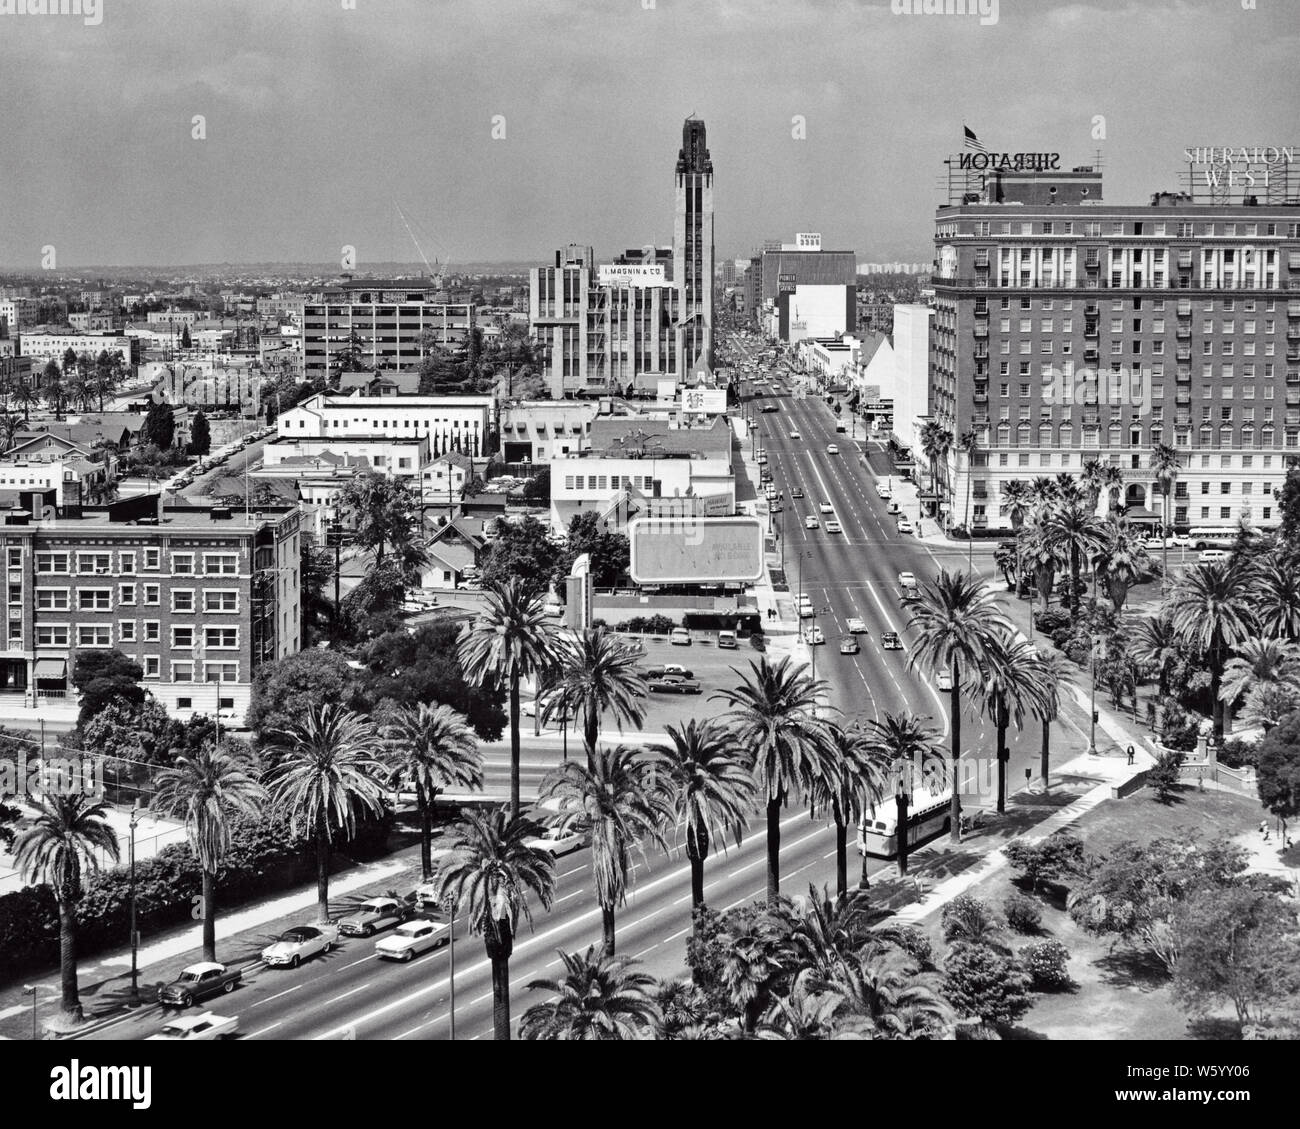 Los Angeles California 1960s High Resolution Stock Photography and Images -  Alamy